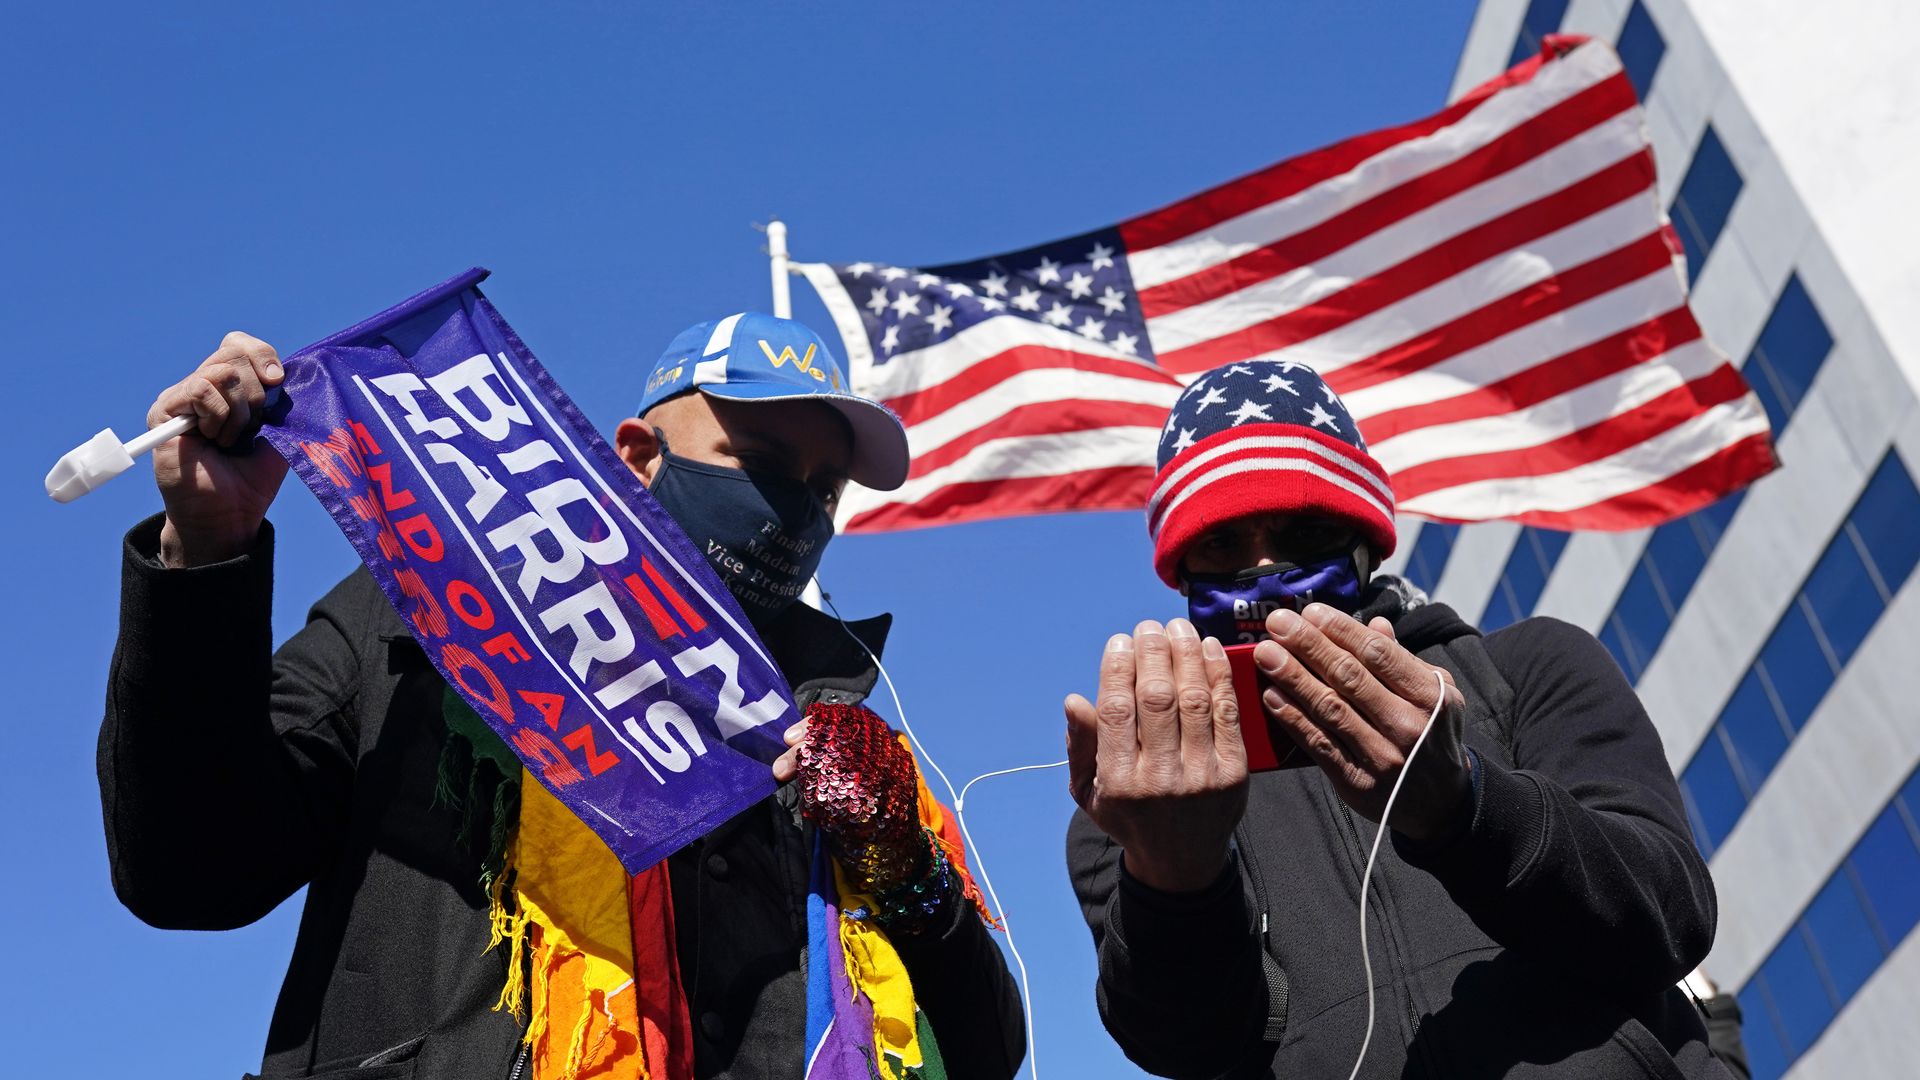 Supporters holds flags as they listen to U.S. President Joe Biden's inauguration speech on a smartphone on January 20, 2021 in Washington, DC. 